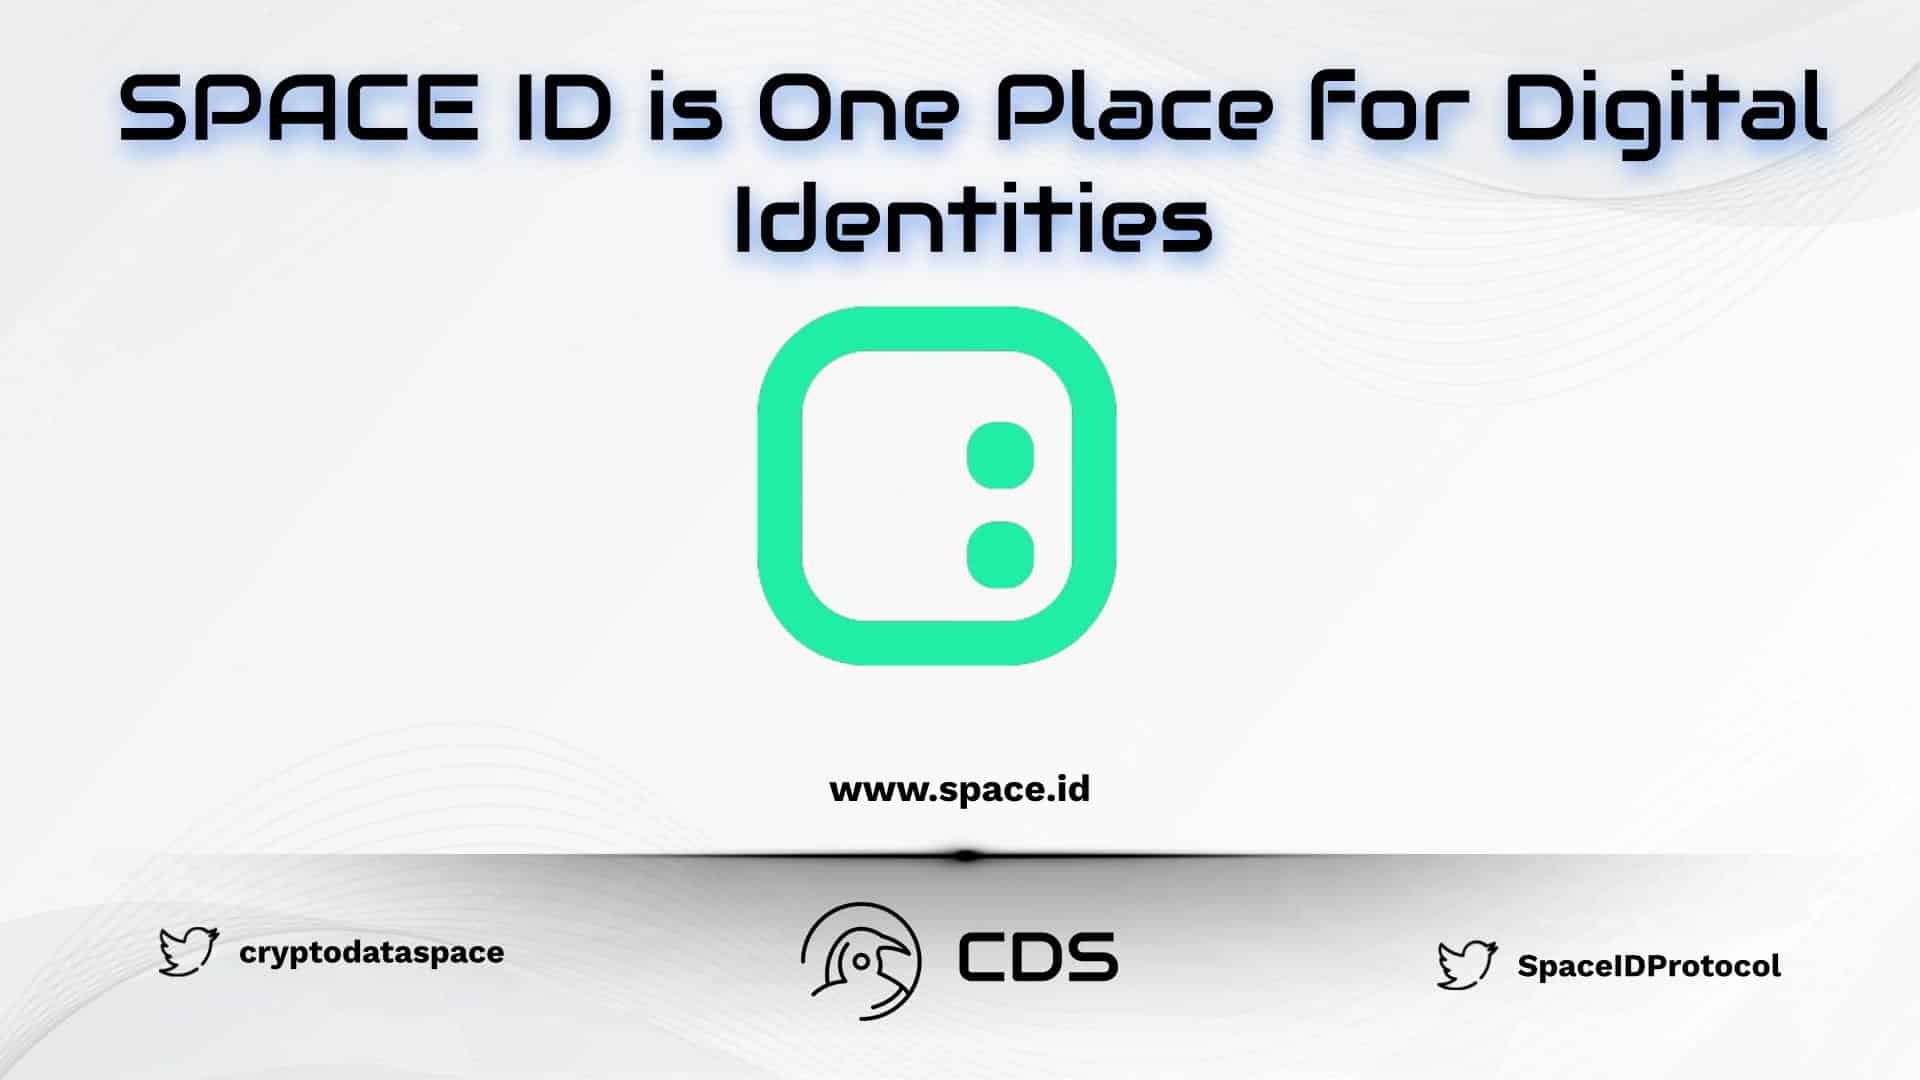 SPACE ID is One Place for Digital Identities